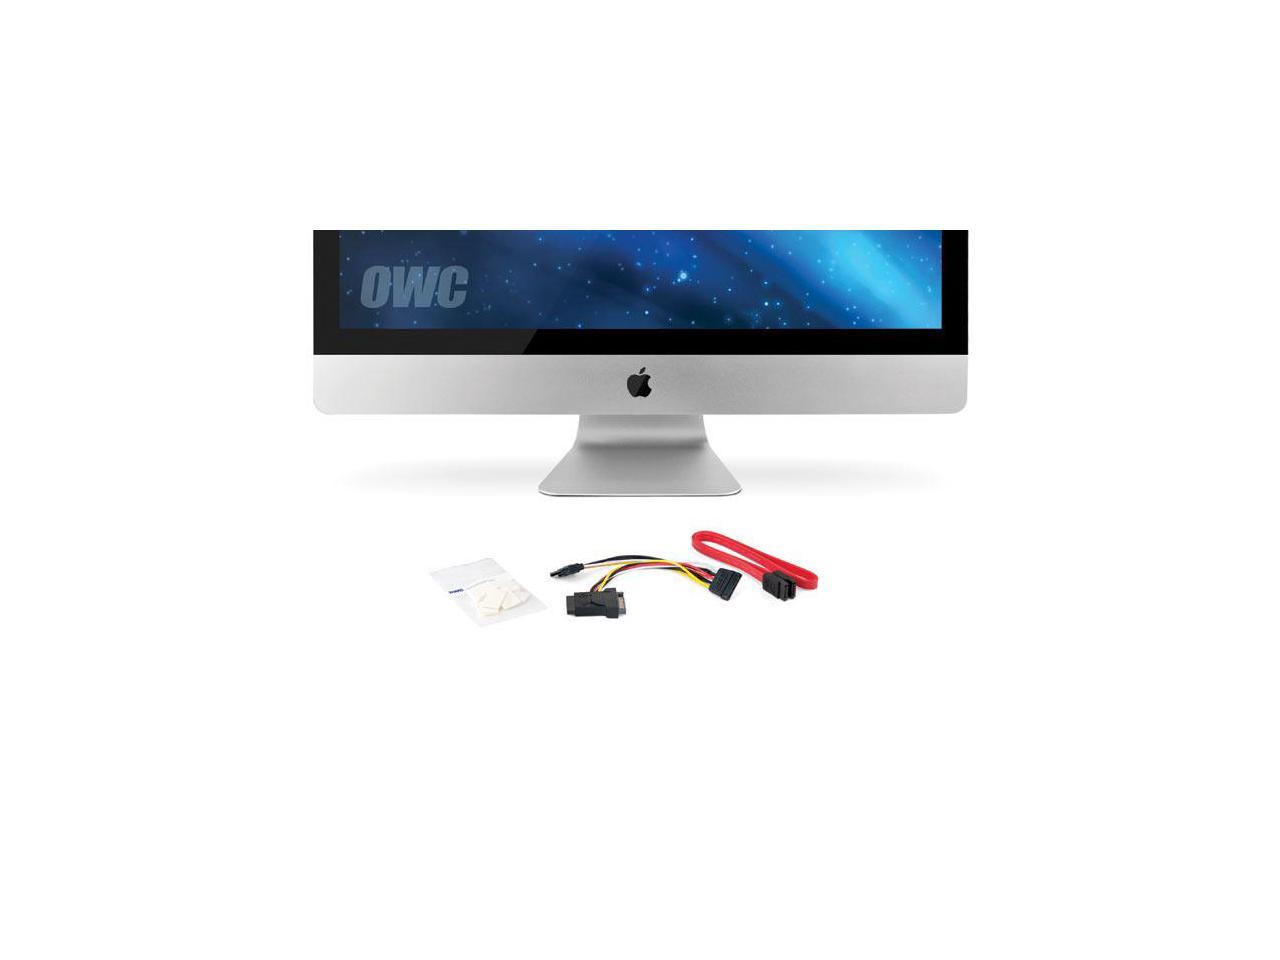 OWC DIY Kit For all Apple 27" iMac 2010 Models For Installing an Internal SSD. Without Tools.Model OWCDIDIM27SSD10